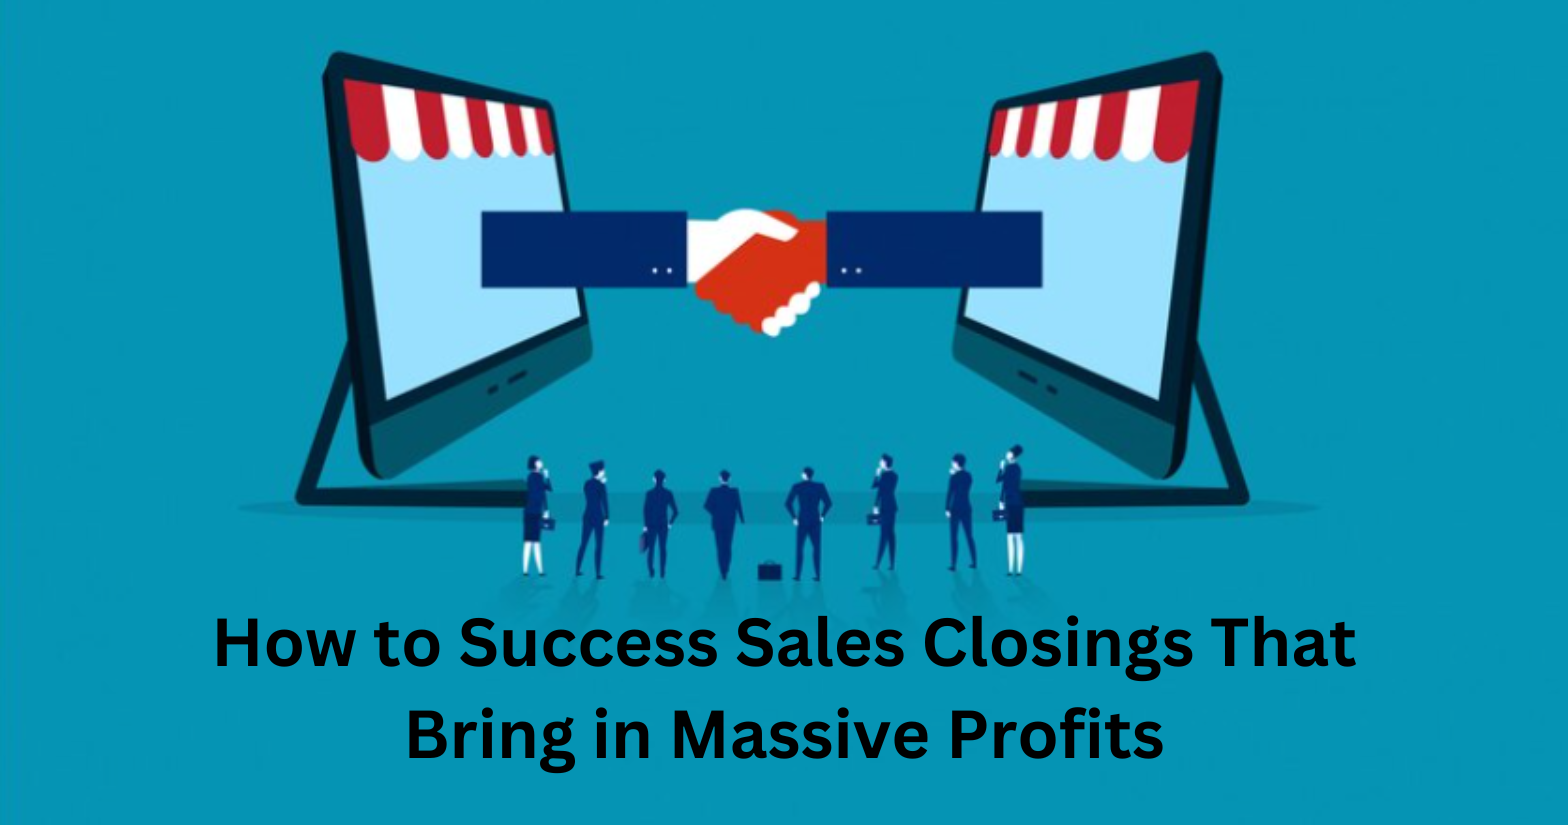 Successful Sales Closings Resulting in Profit - Strategies and Tips for Massive Revenue Generation